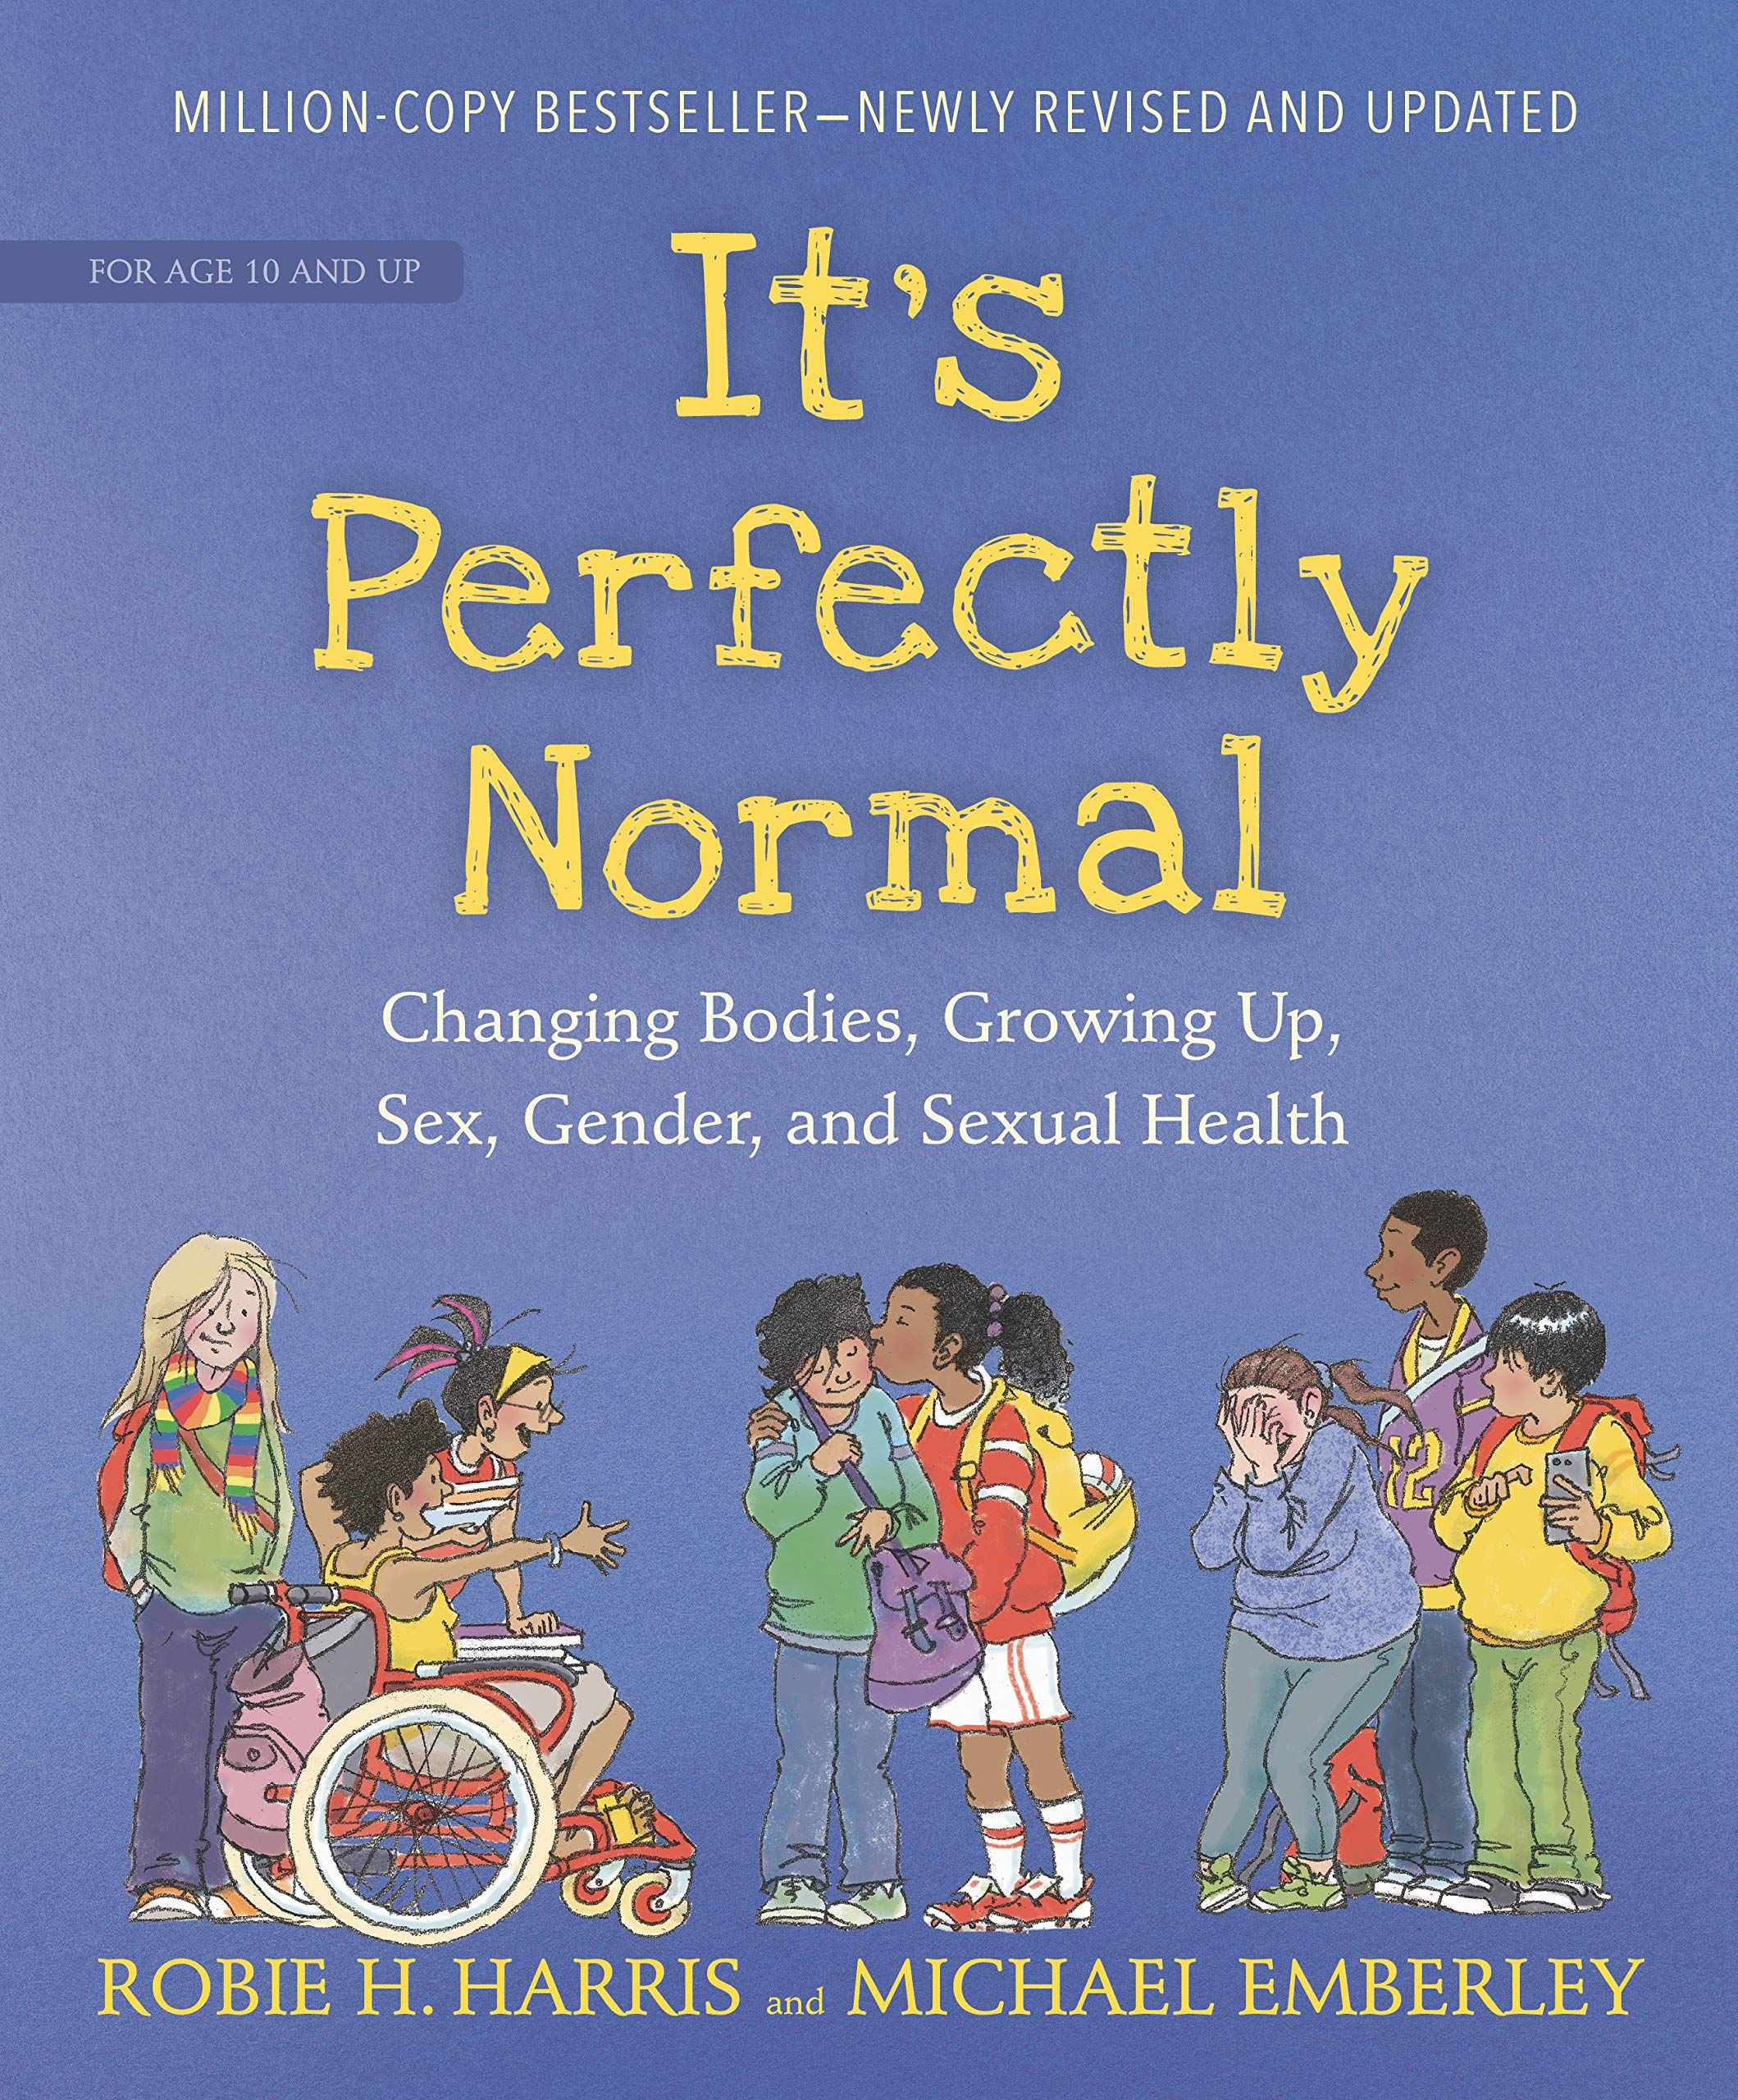 Image of the cover for the most updated version of IT'S PERFECTLY NORMAL. 